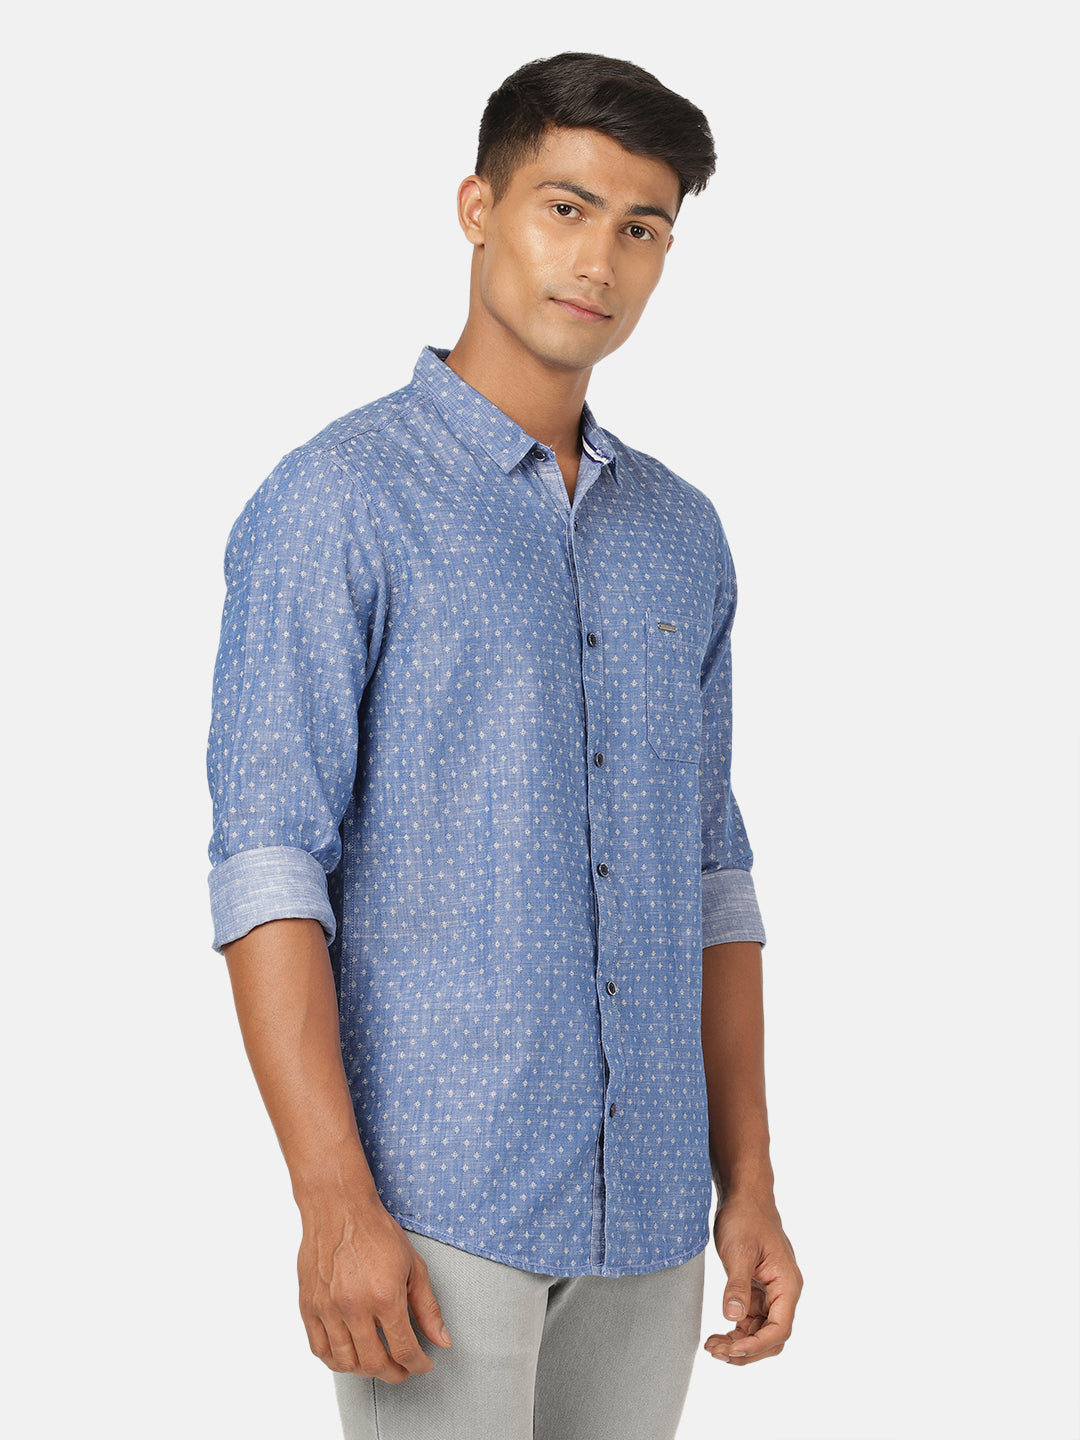 Casual Full Sleeve Slim Fit Printed Blue with Collar Shirt for Men